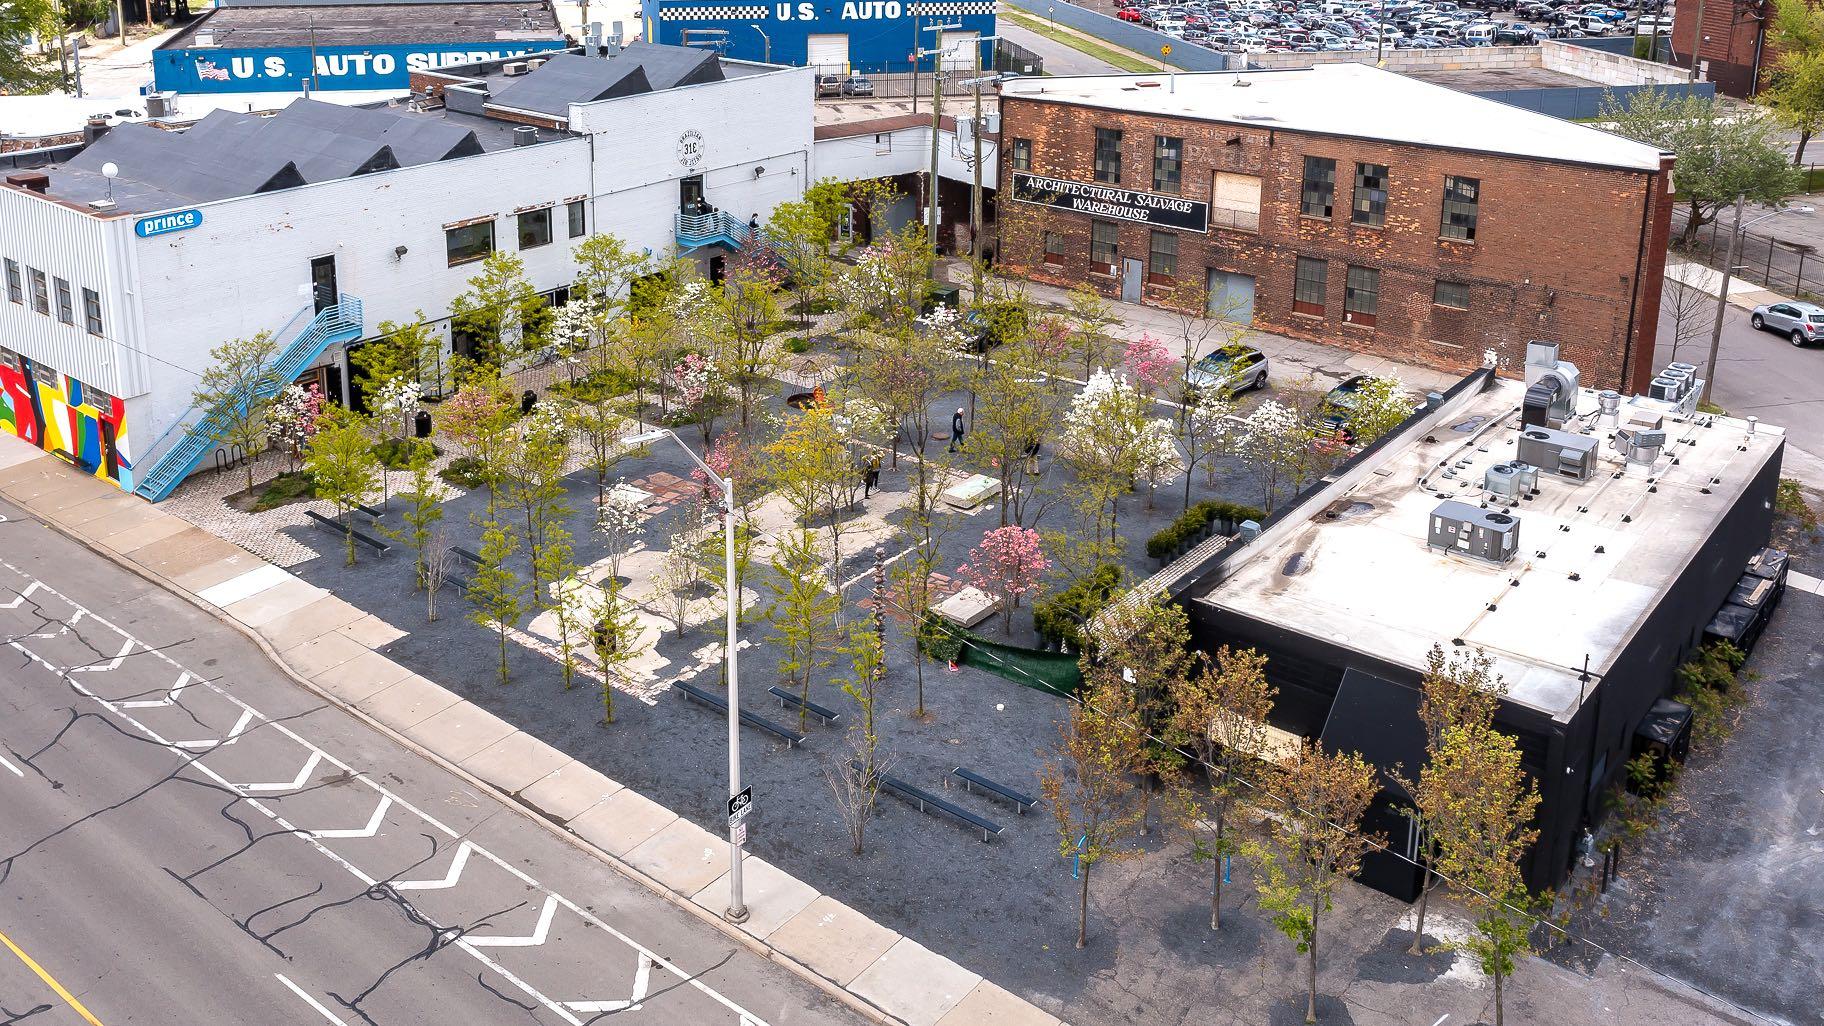 Transformation of a parking lot in Detroit demonstrates what depaving can do. (Courtesy Prince Concepts and The Cultural Landscape Foundation)